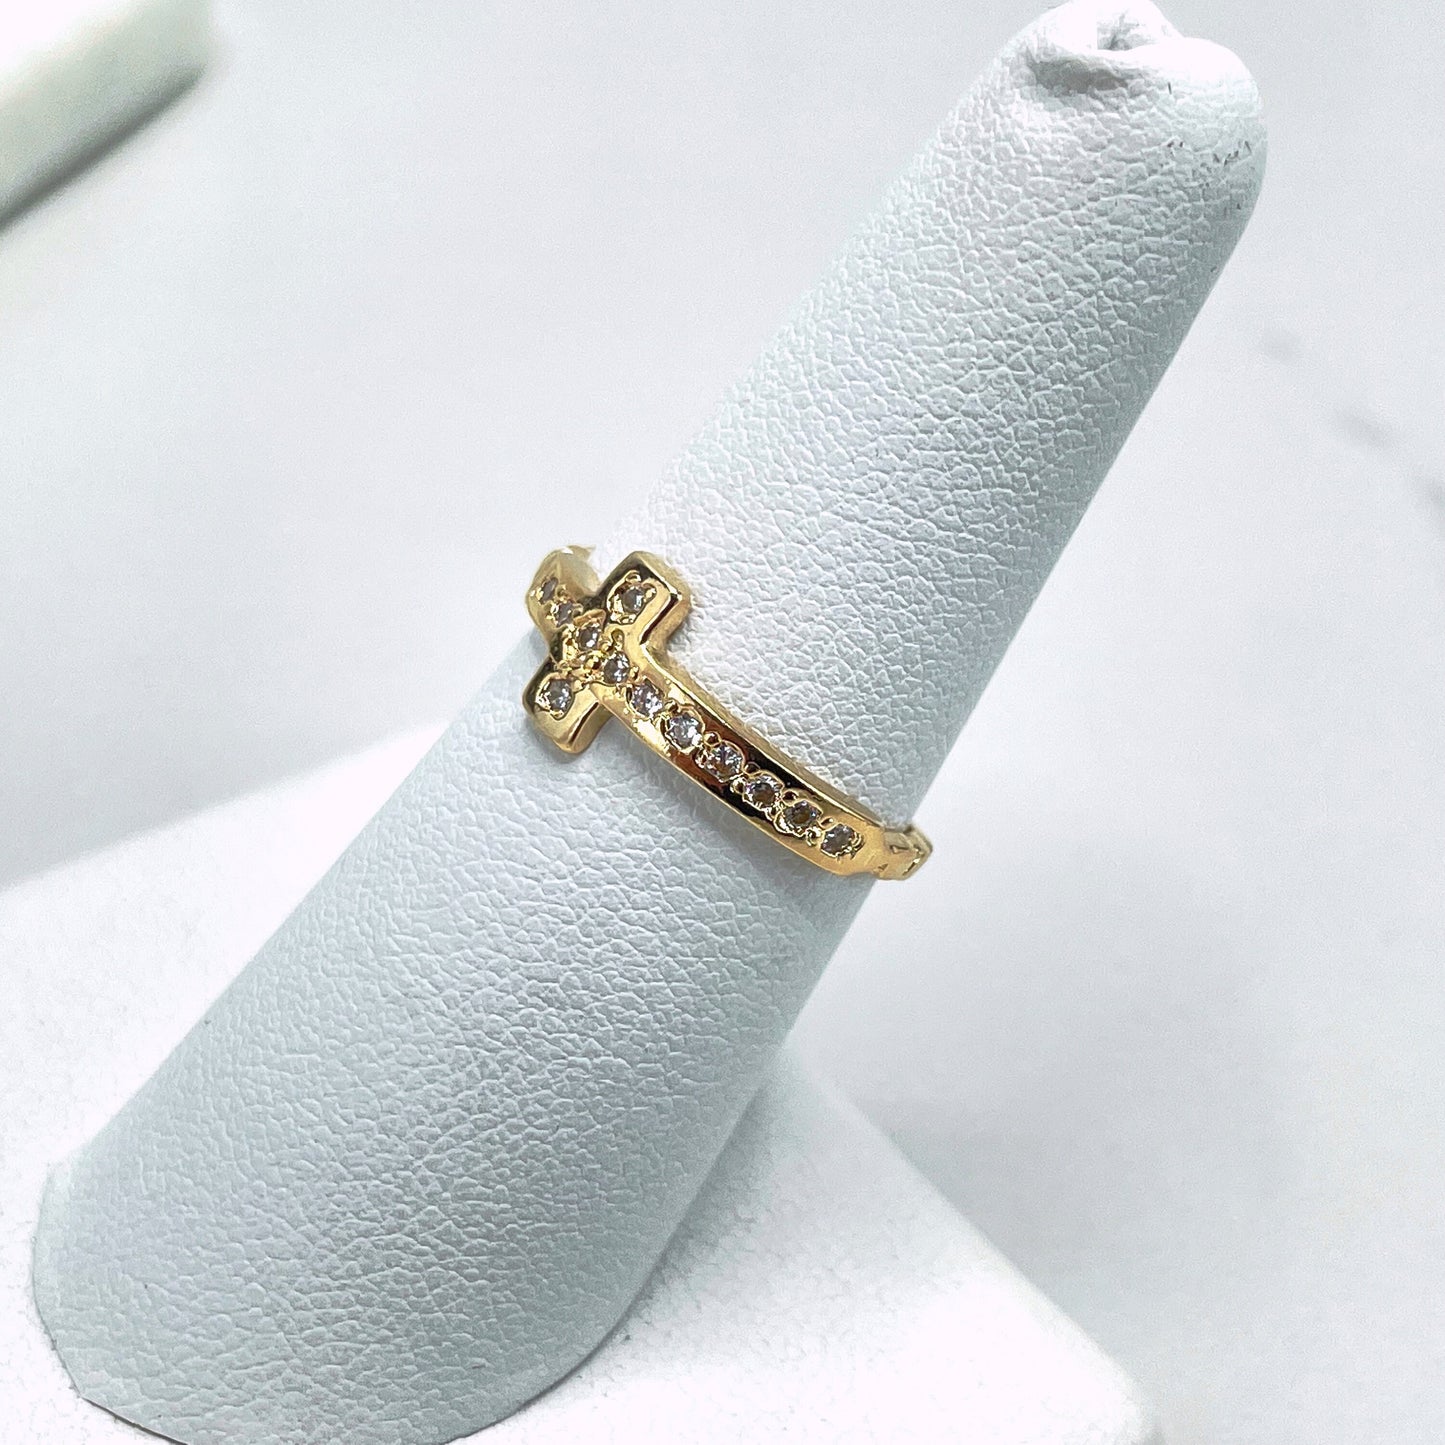 18k Gold Filled Cross Ring Featuring with  Cubic Zirconia On Top Band Wholesale Jewelry Making Supplies